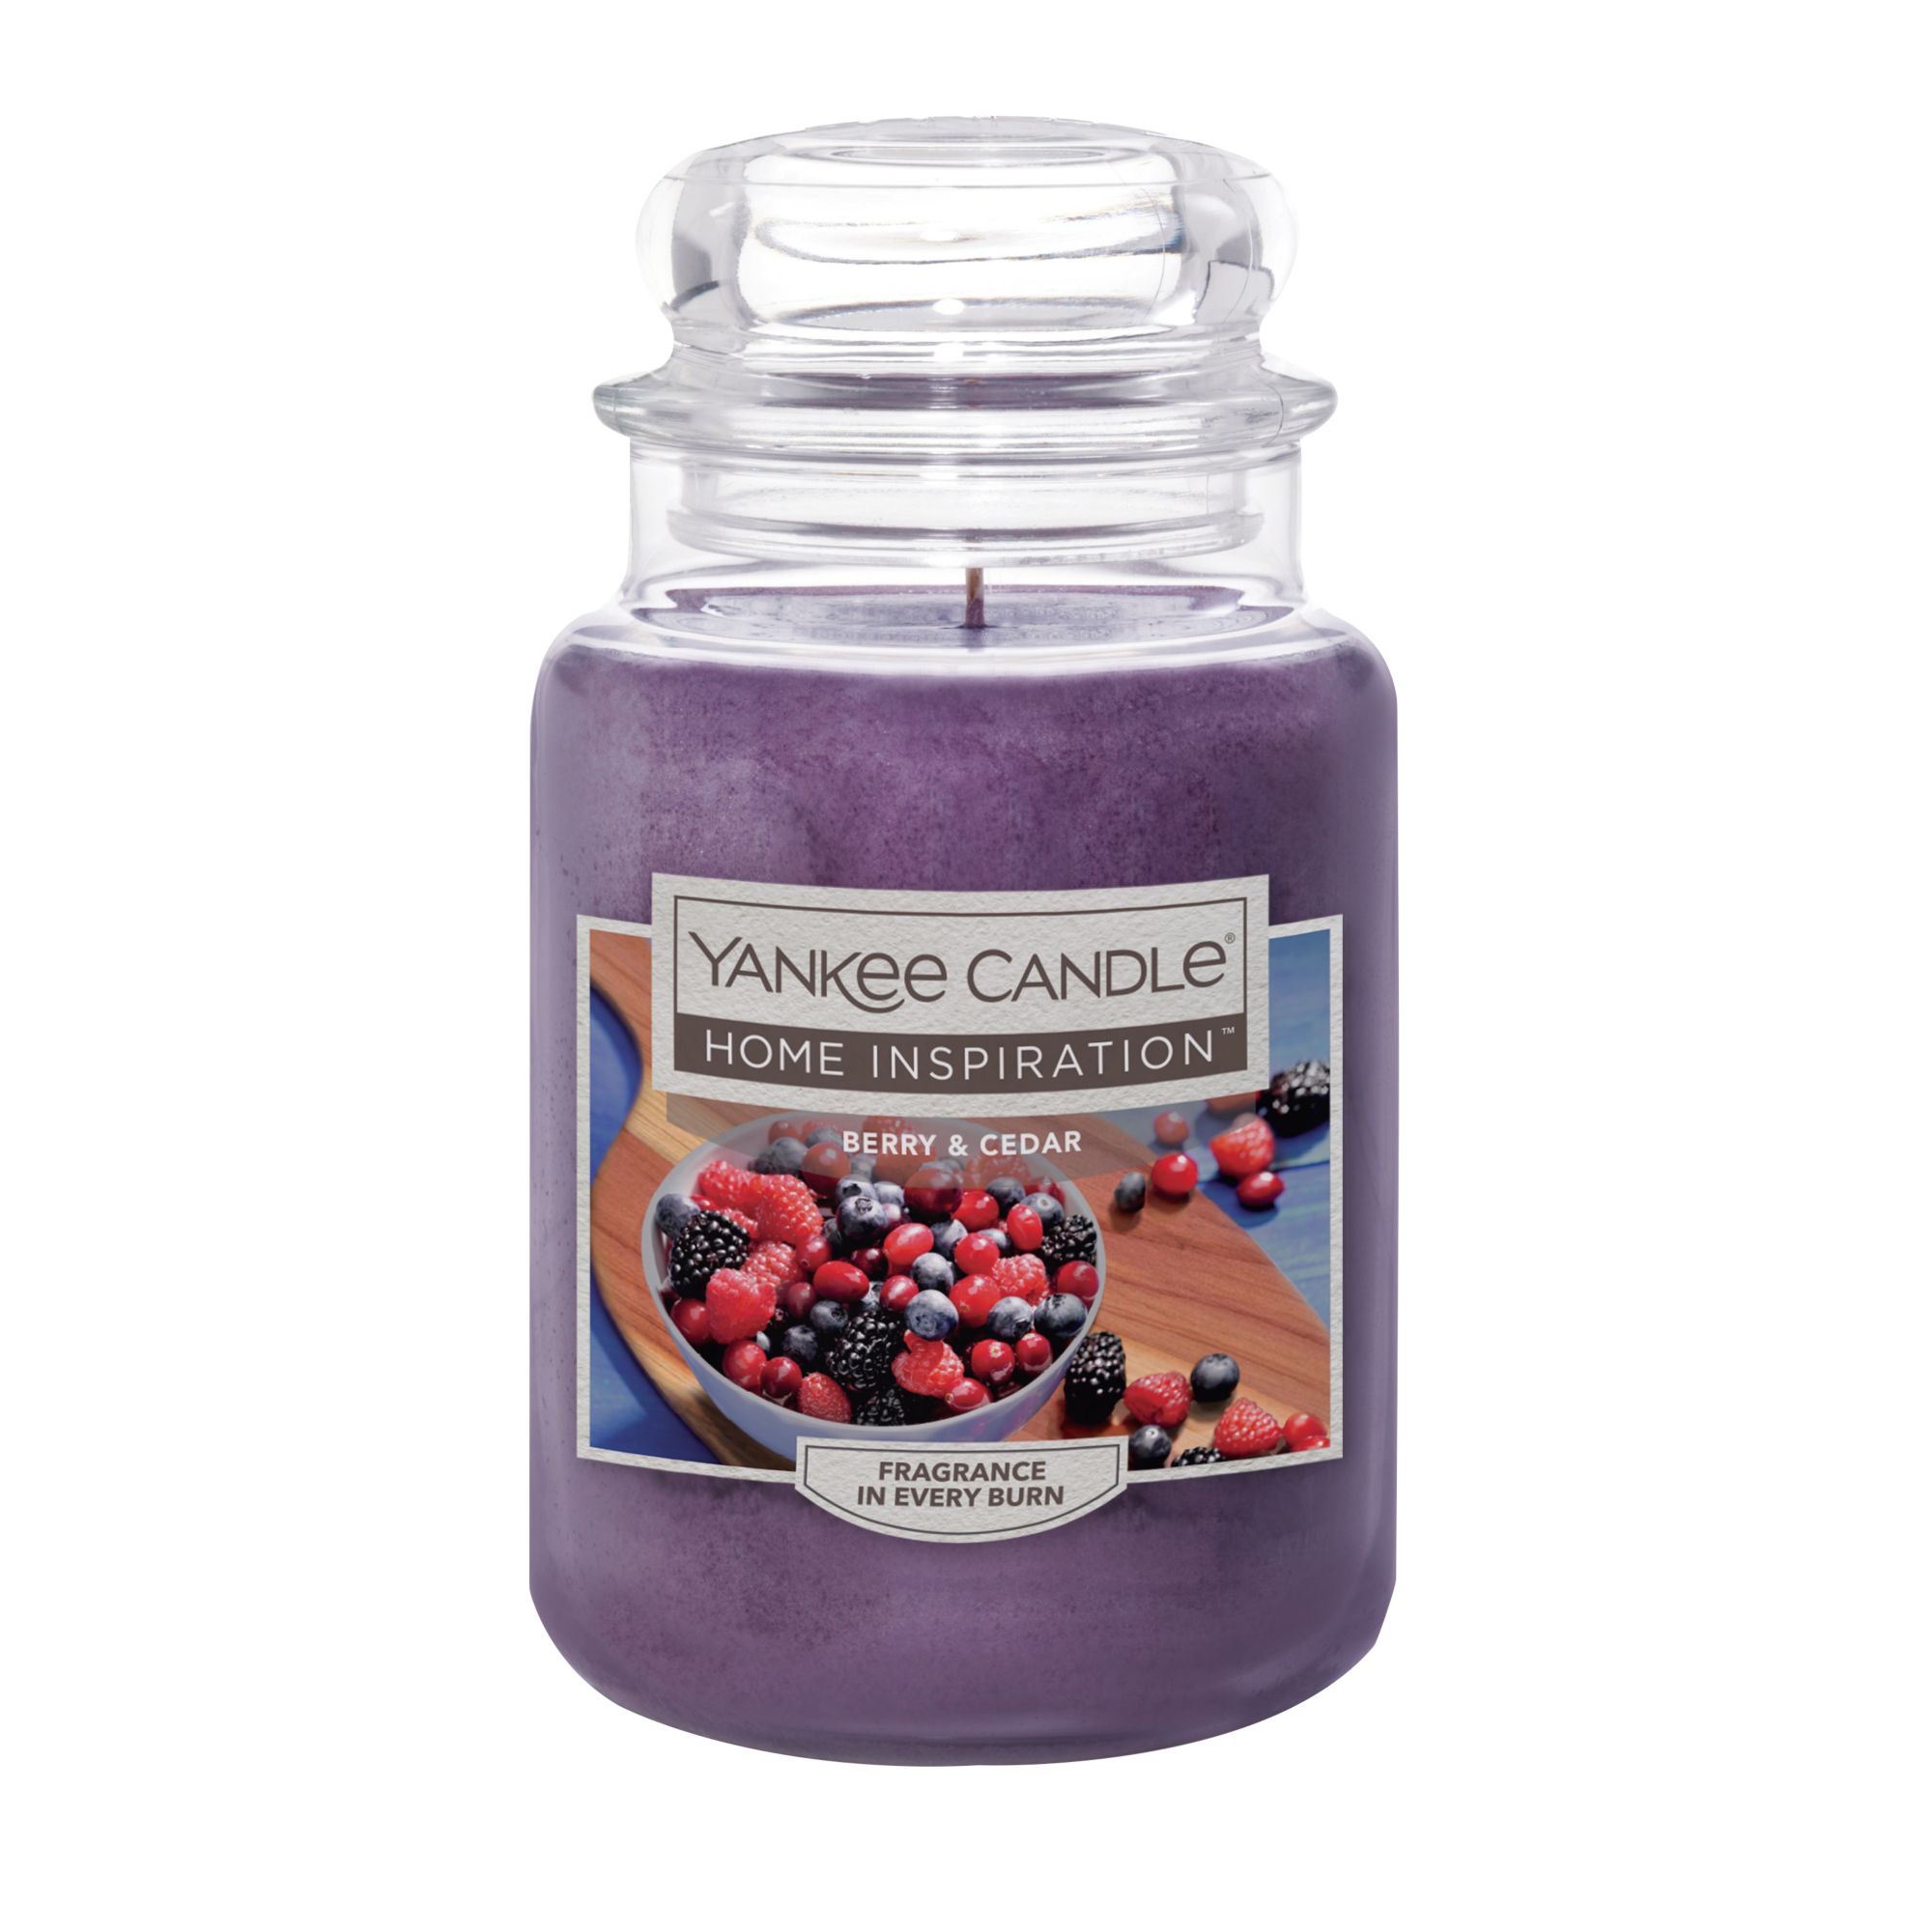 Home for the Holidays - Inspired by Yankee Candles Scented Jar Candles